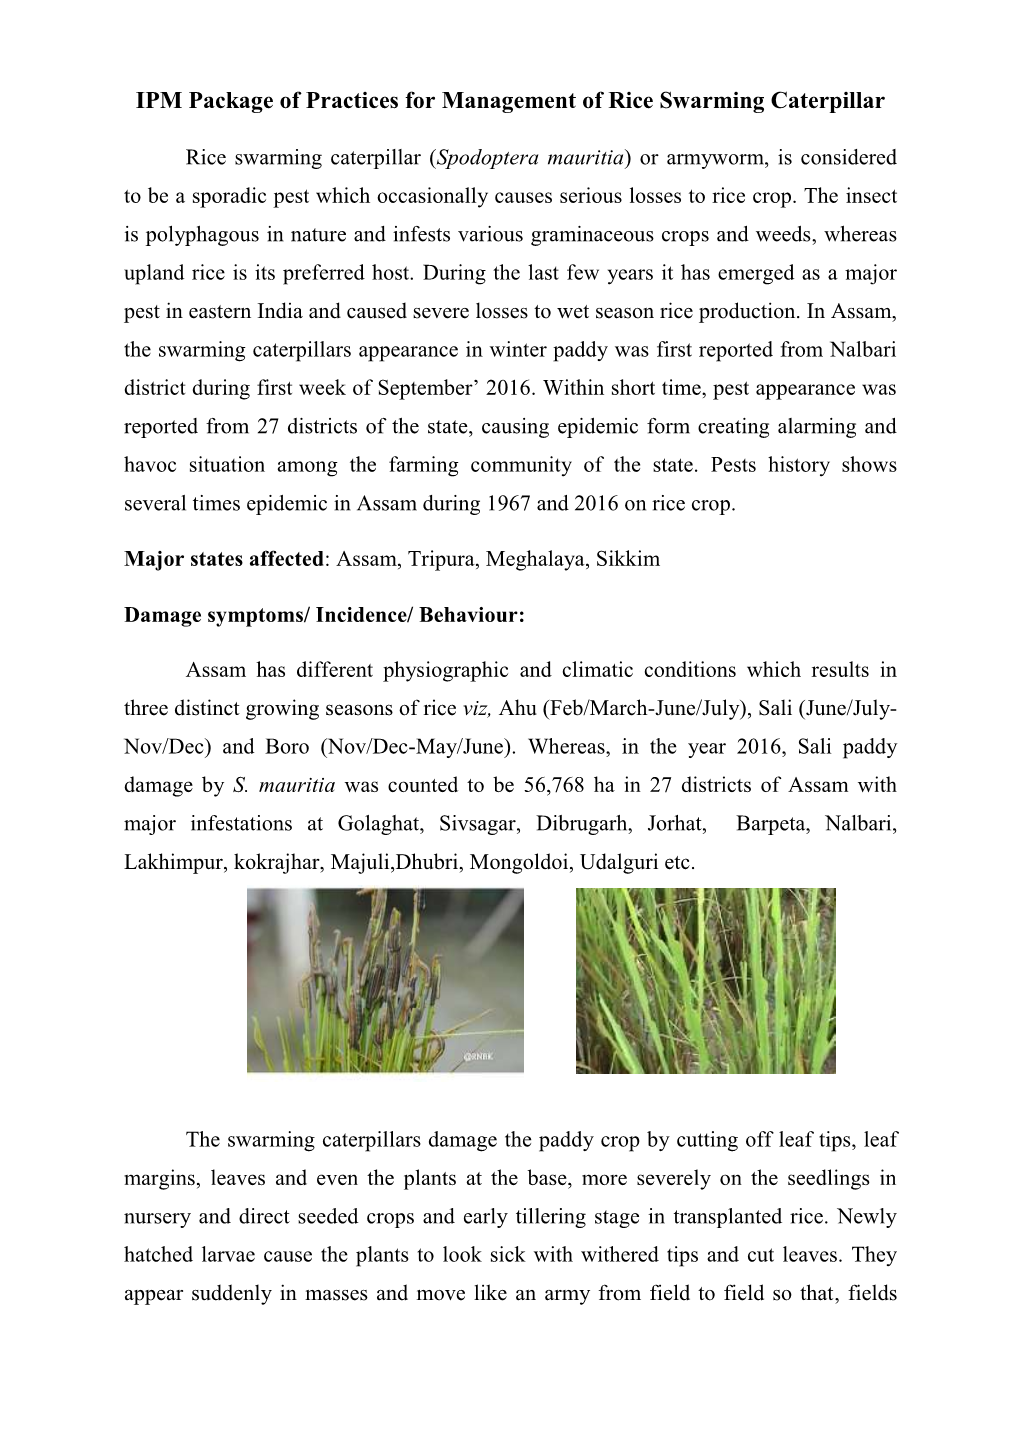 IPM Package of Practices for Management of Rice Swarming Caterpillar